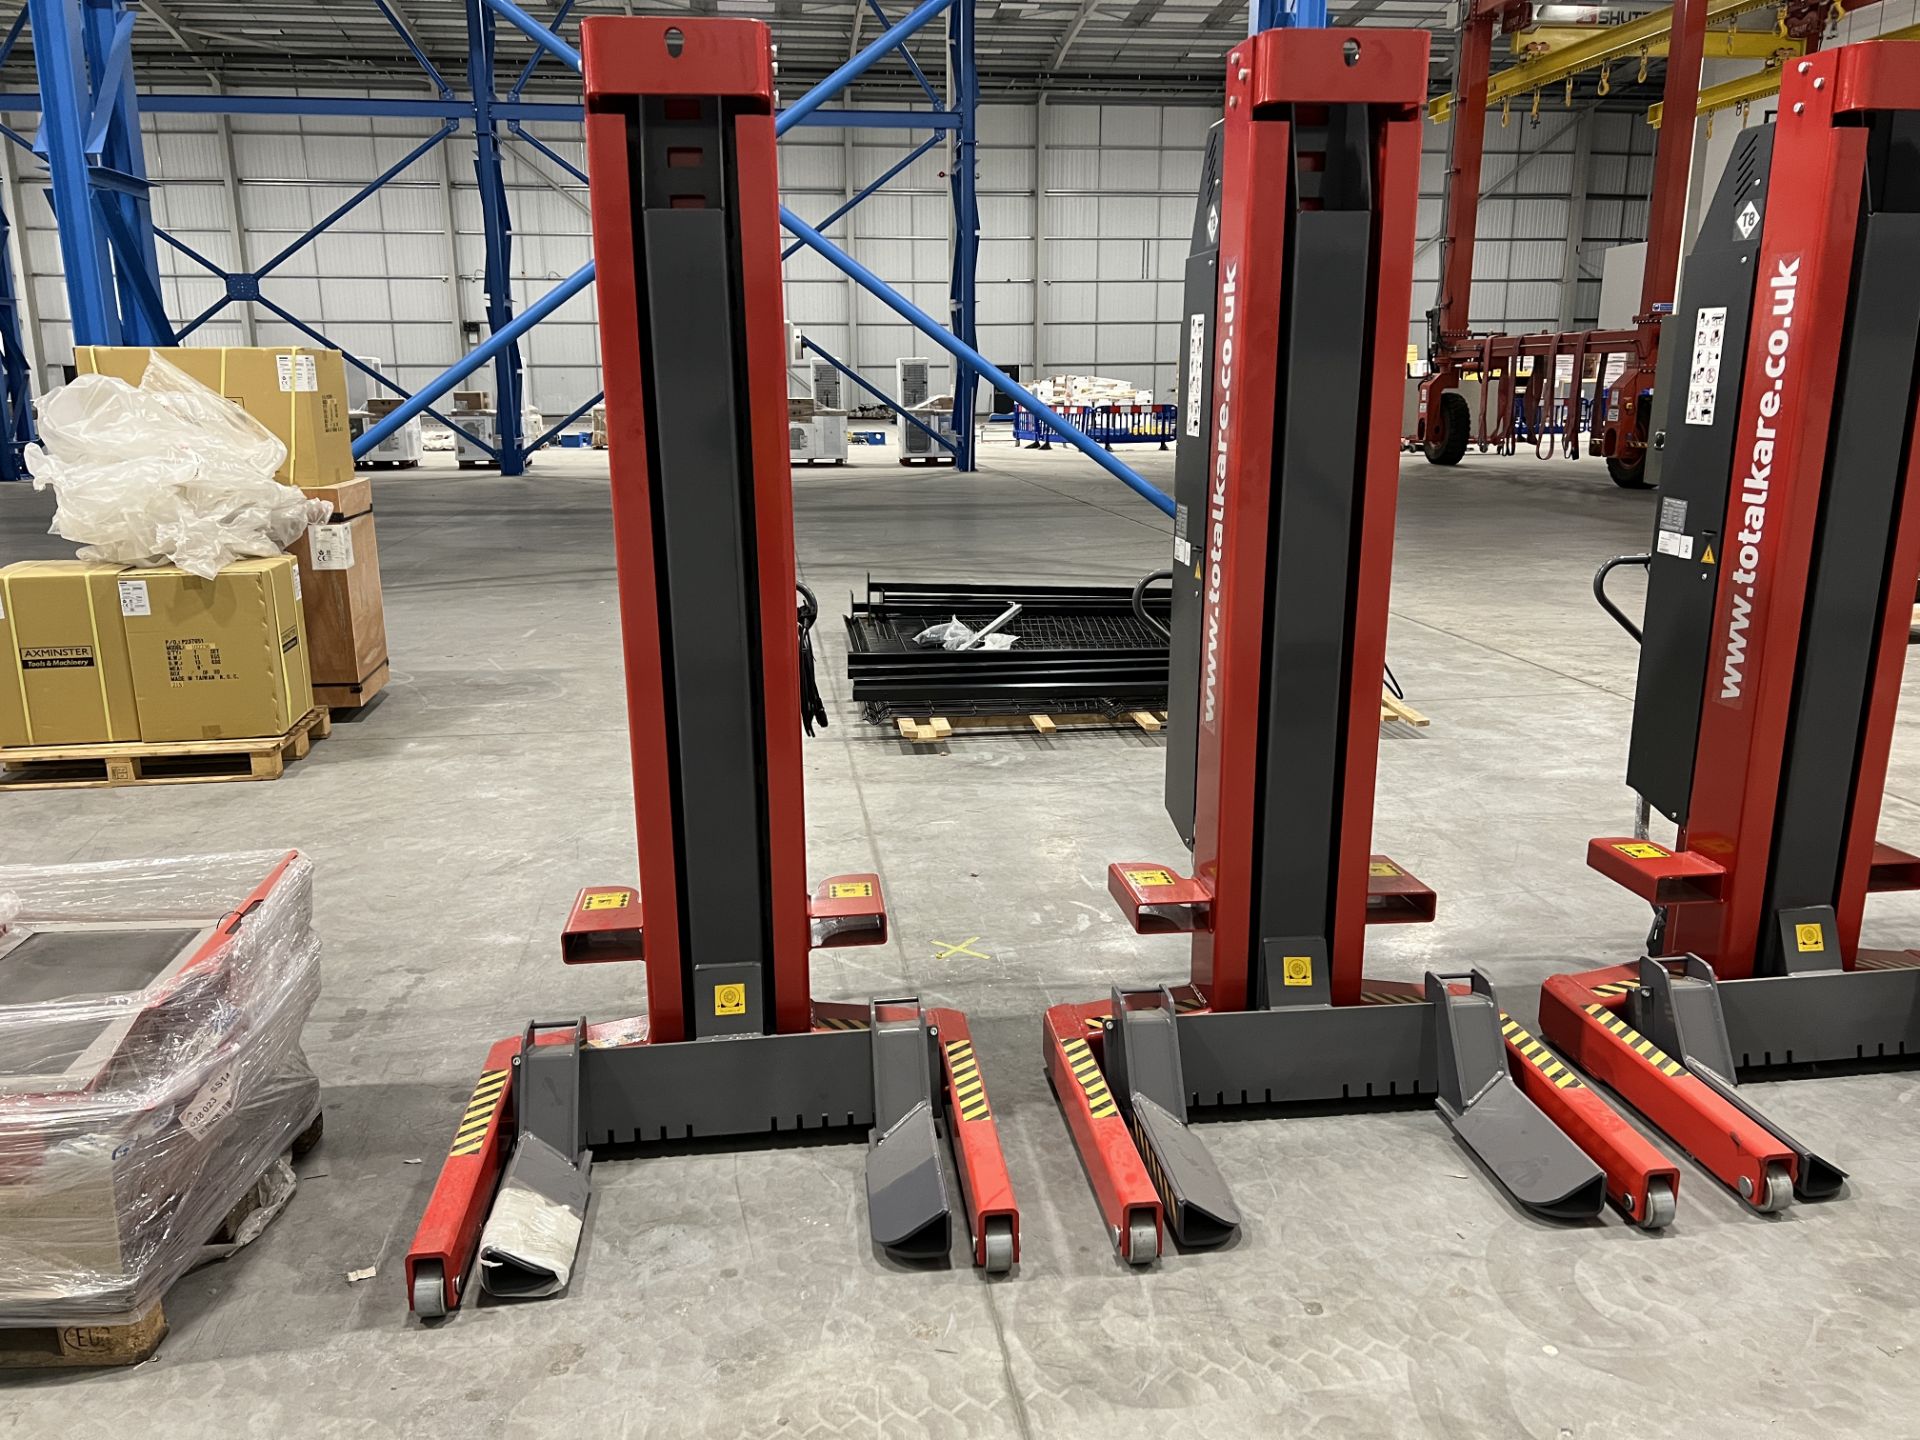 Qty 4, Totalkare T8DC cable free mobile column vehicle lifts, S/No. 012239/4, 012239/3, 012239/2, - Image 3 of 18